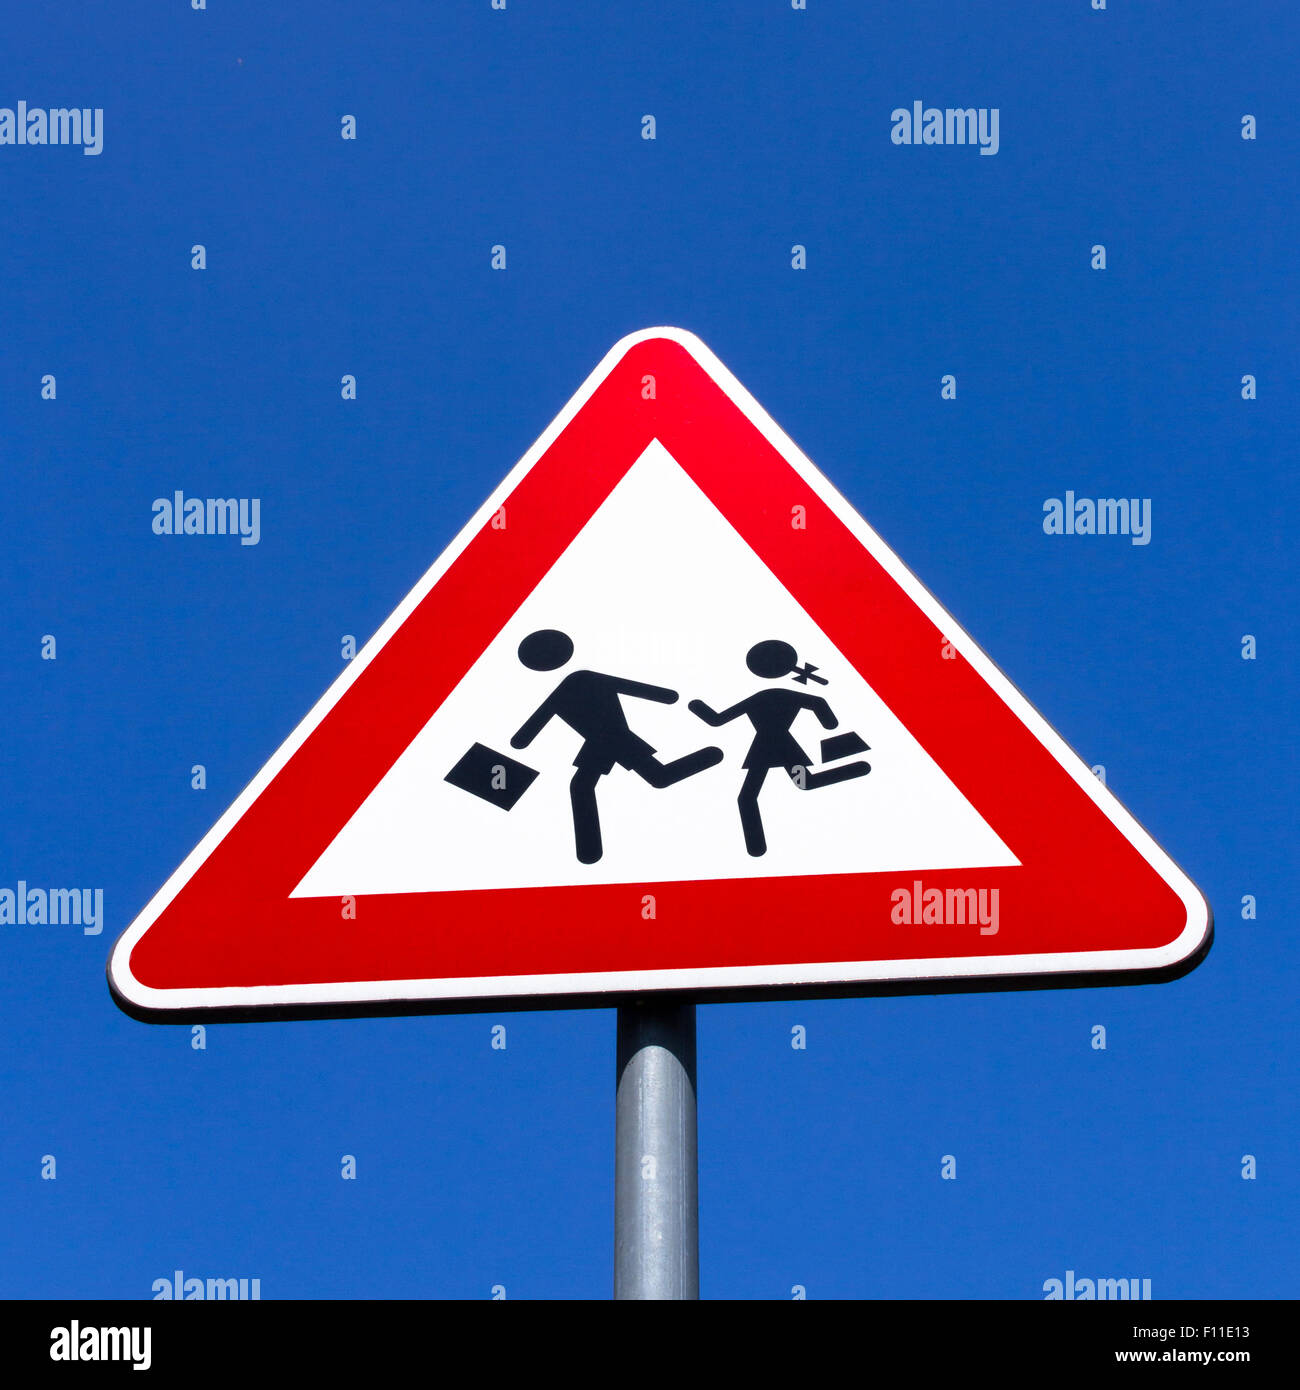 Road Sign of crosswalk of students, in vertical composition. Stock Photo